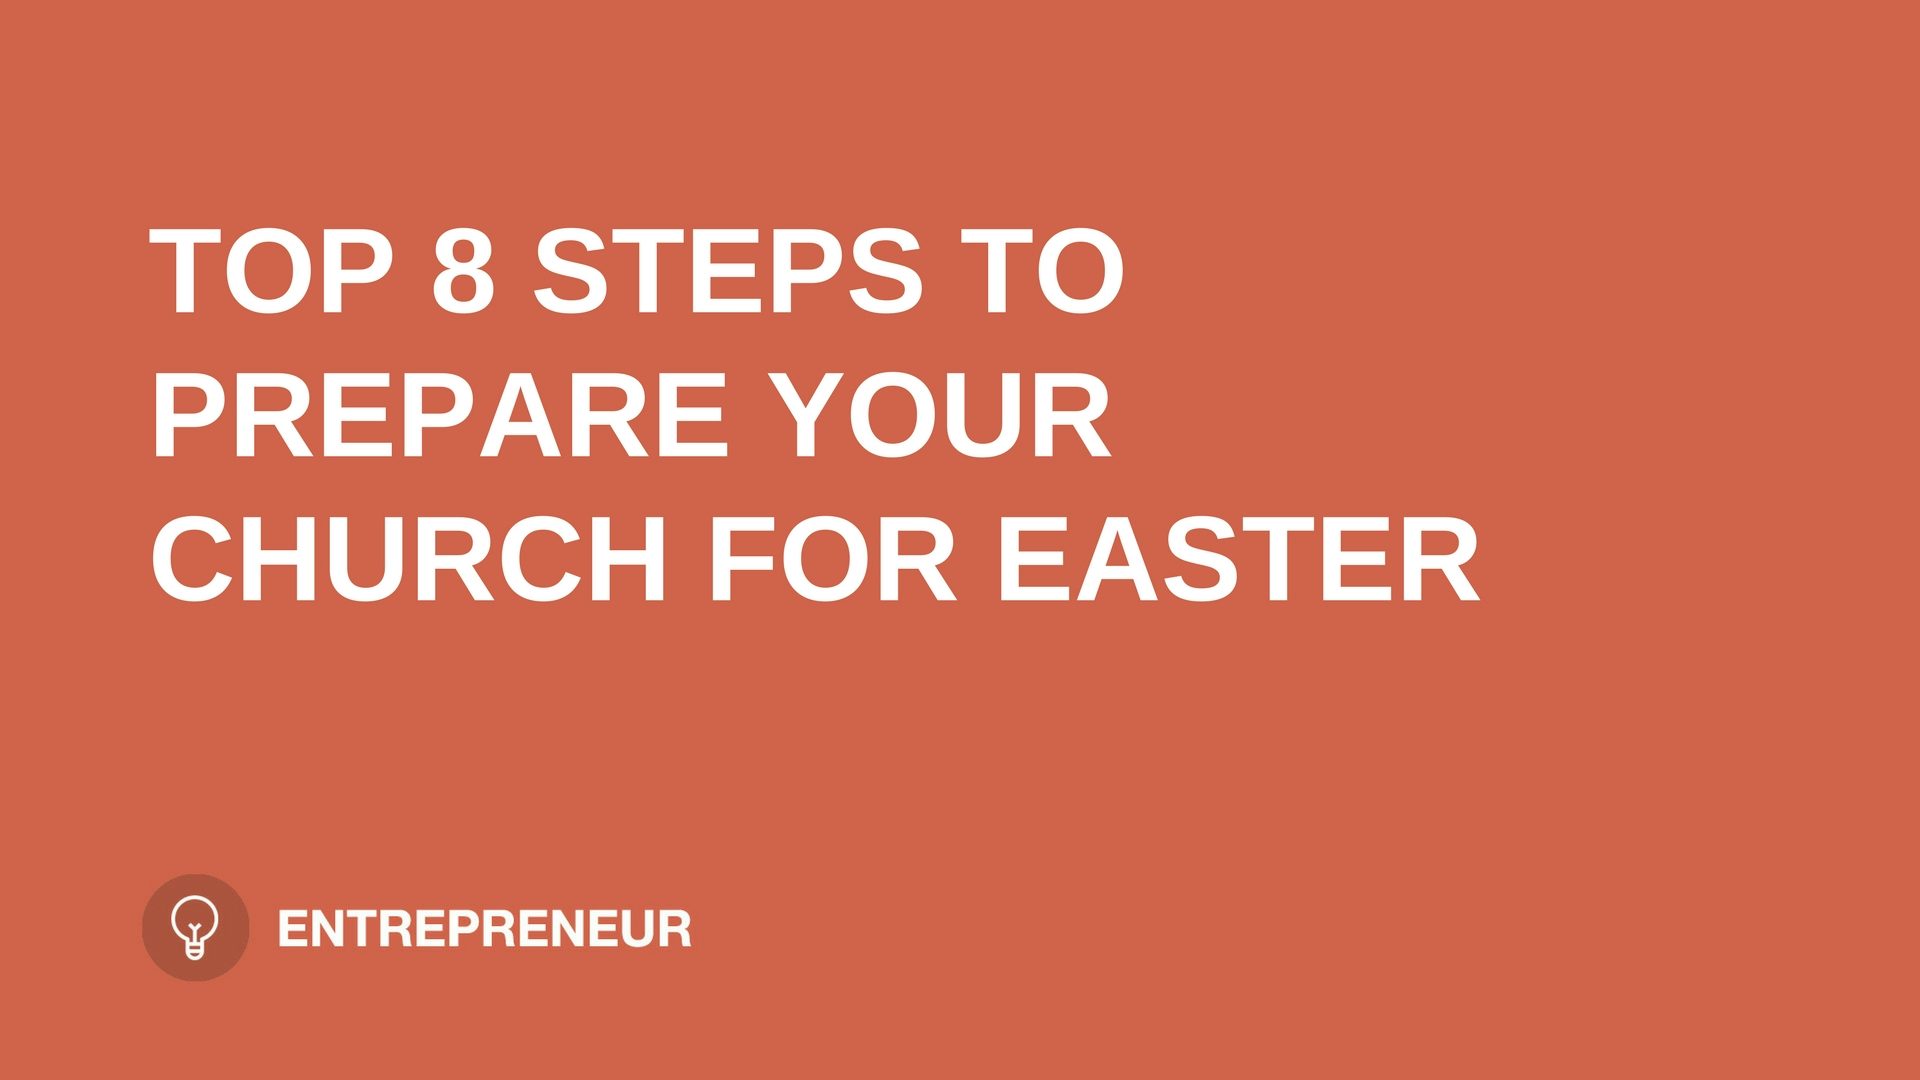 text "TOP 8 STEPS TO PREPARE YOUR CHURCH FOR EASTER" on orange background leaders.church